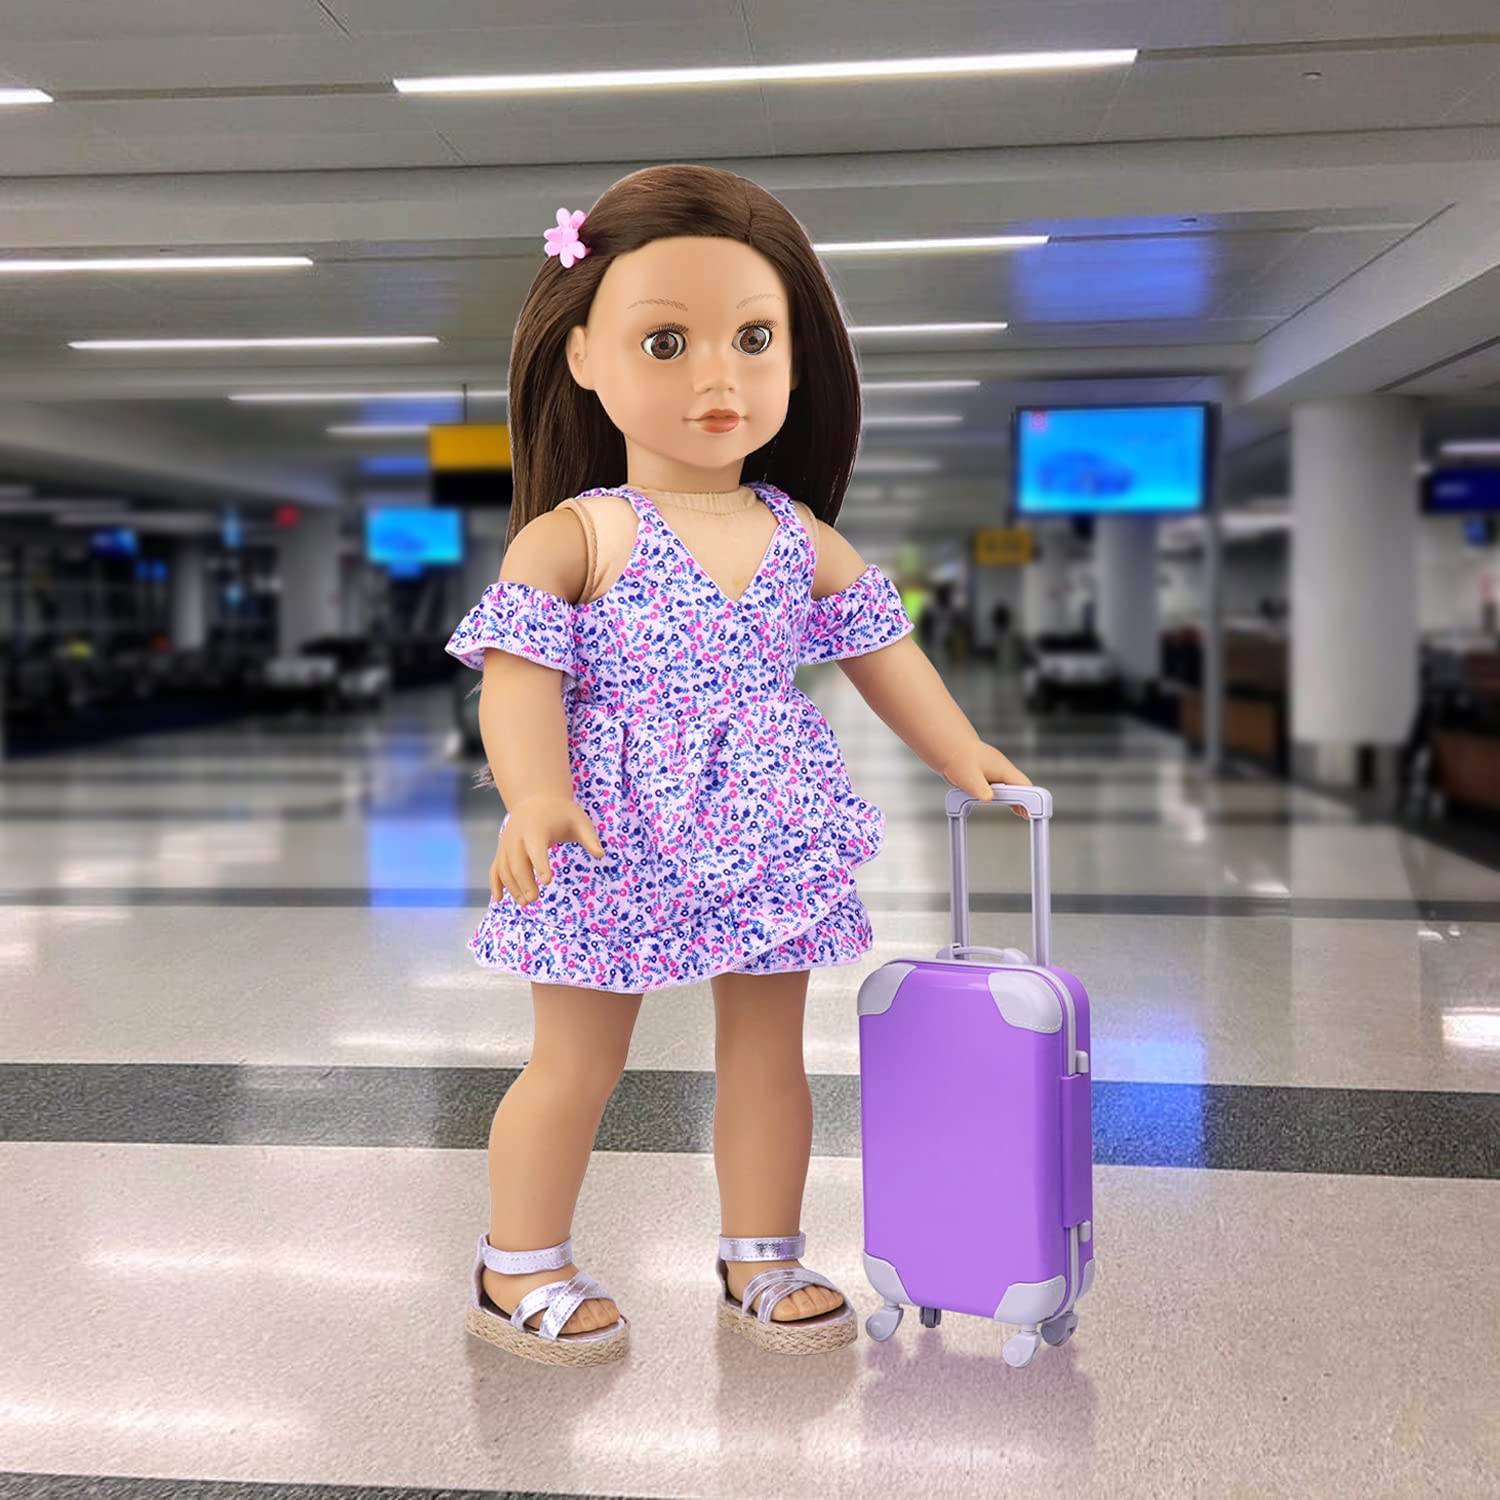 K.T. Fancy 16 pcs American 18 Doll Accessories Suitcase Travel Luggage Play Set for 18 Inch Doll Travel Carrier, Sunglasses Camera Computer Phone Pad Travel Pillow Blindfold Passport Tickets Cashes